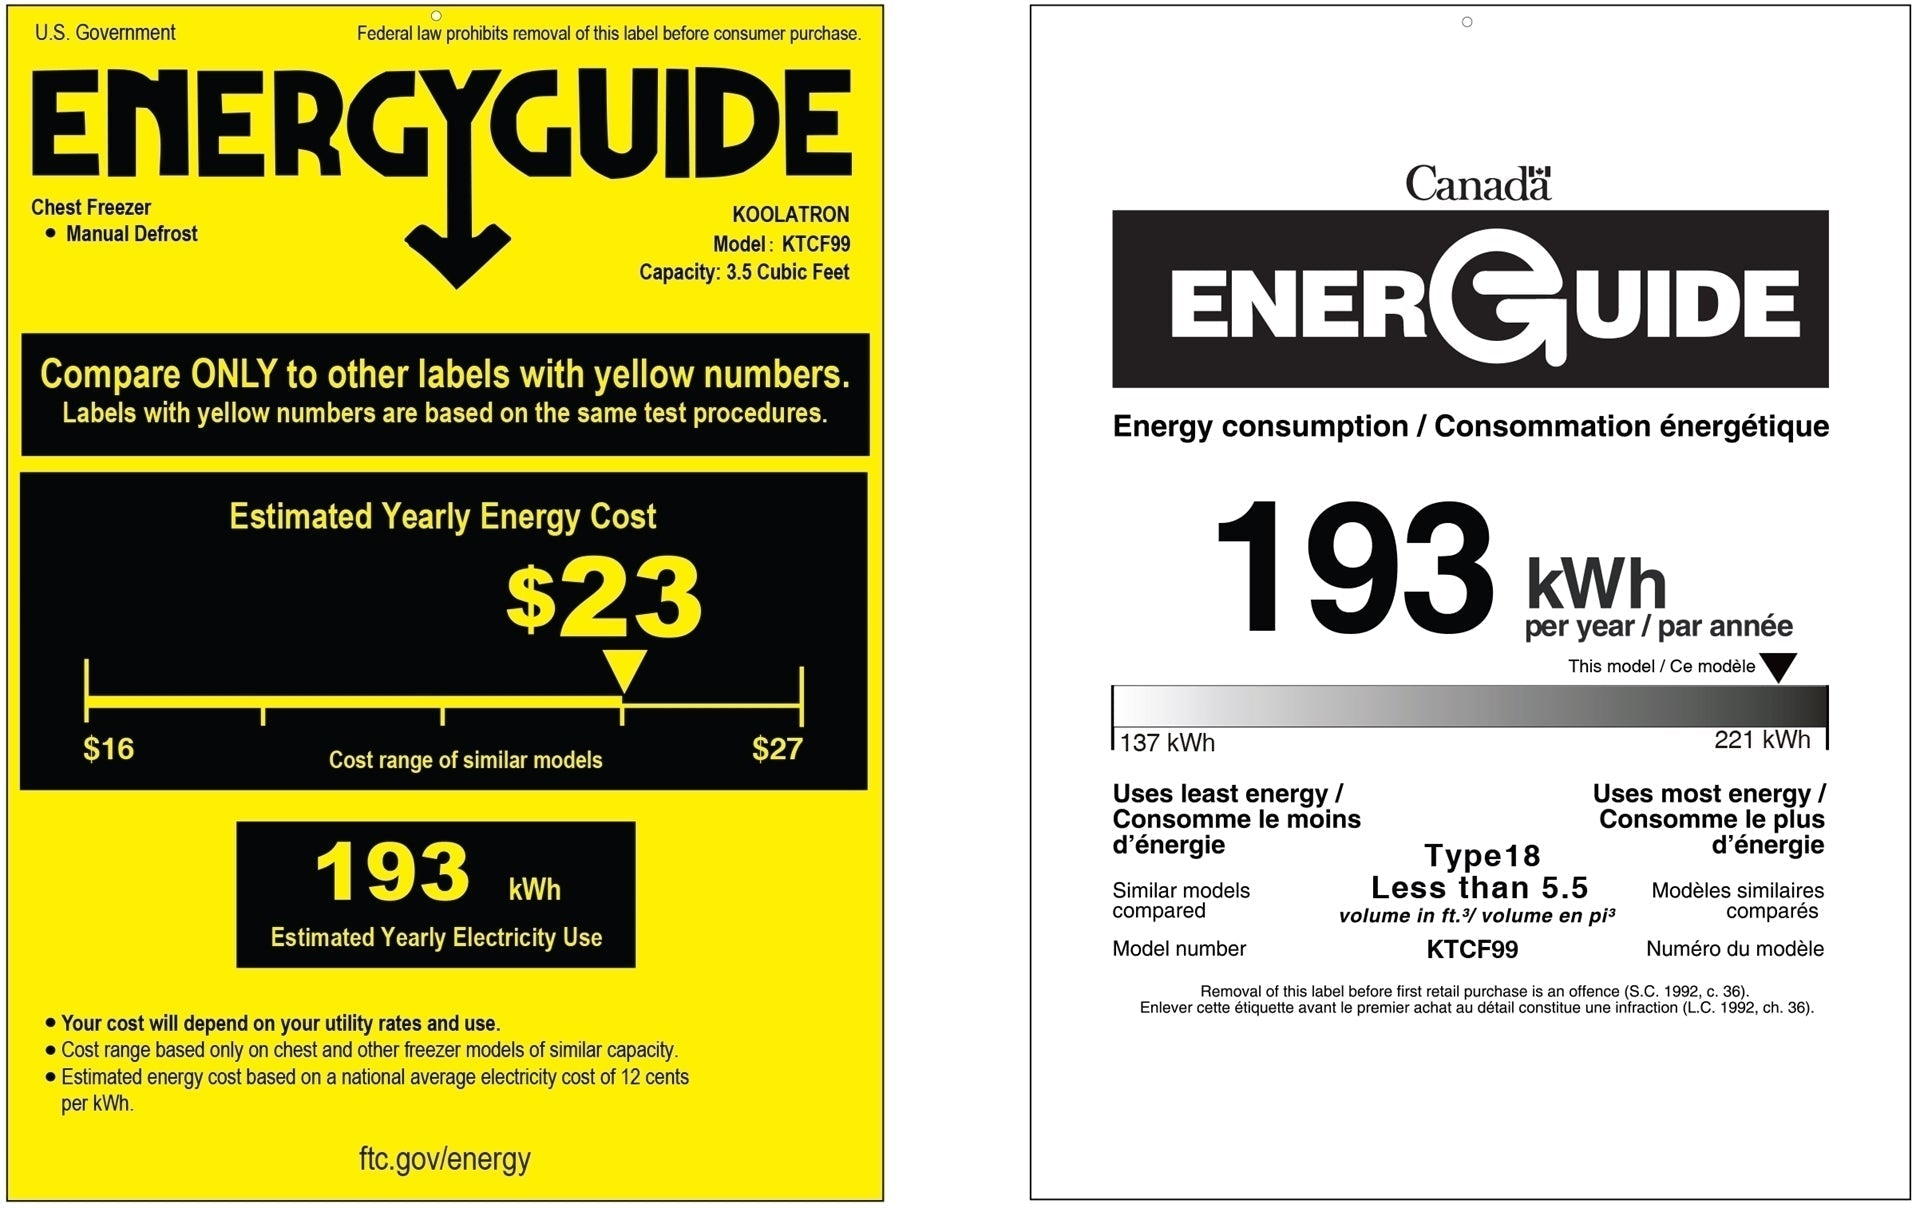 US and Canada Energy Guide certificates for KTCF99 3.5 cu ft chest freezer showing estimated yearly energy cost of $23 and estimated yearly energy consumption of 193 kWh